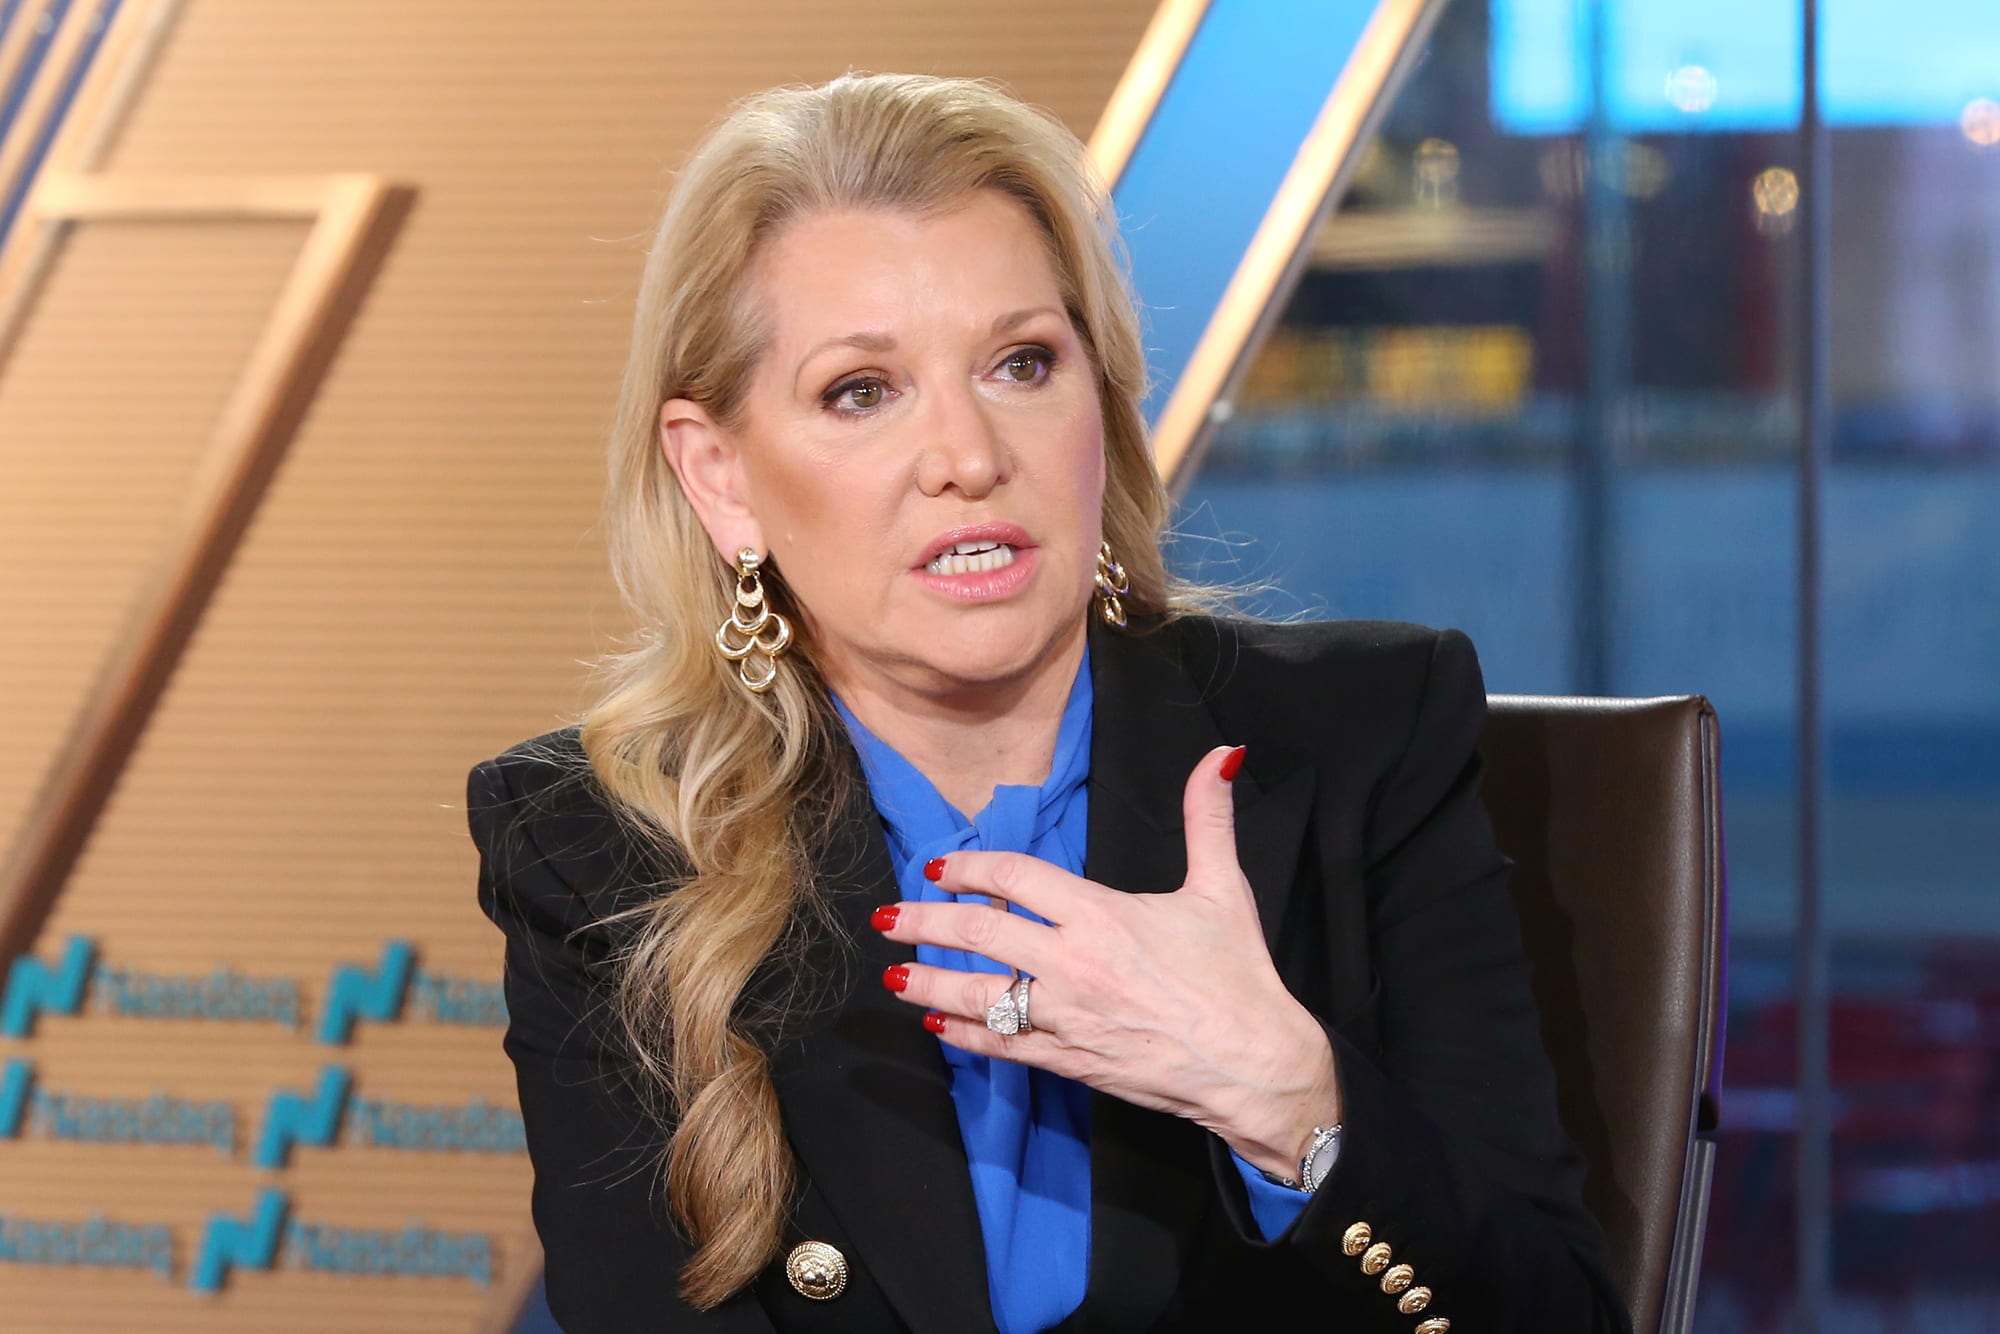 Mindy Grossman shocked her dad and mom by dropping out of school